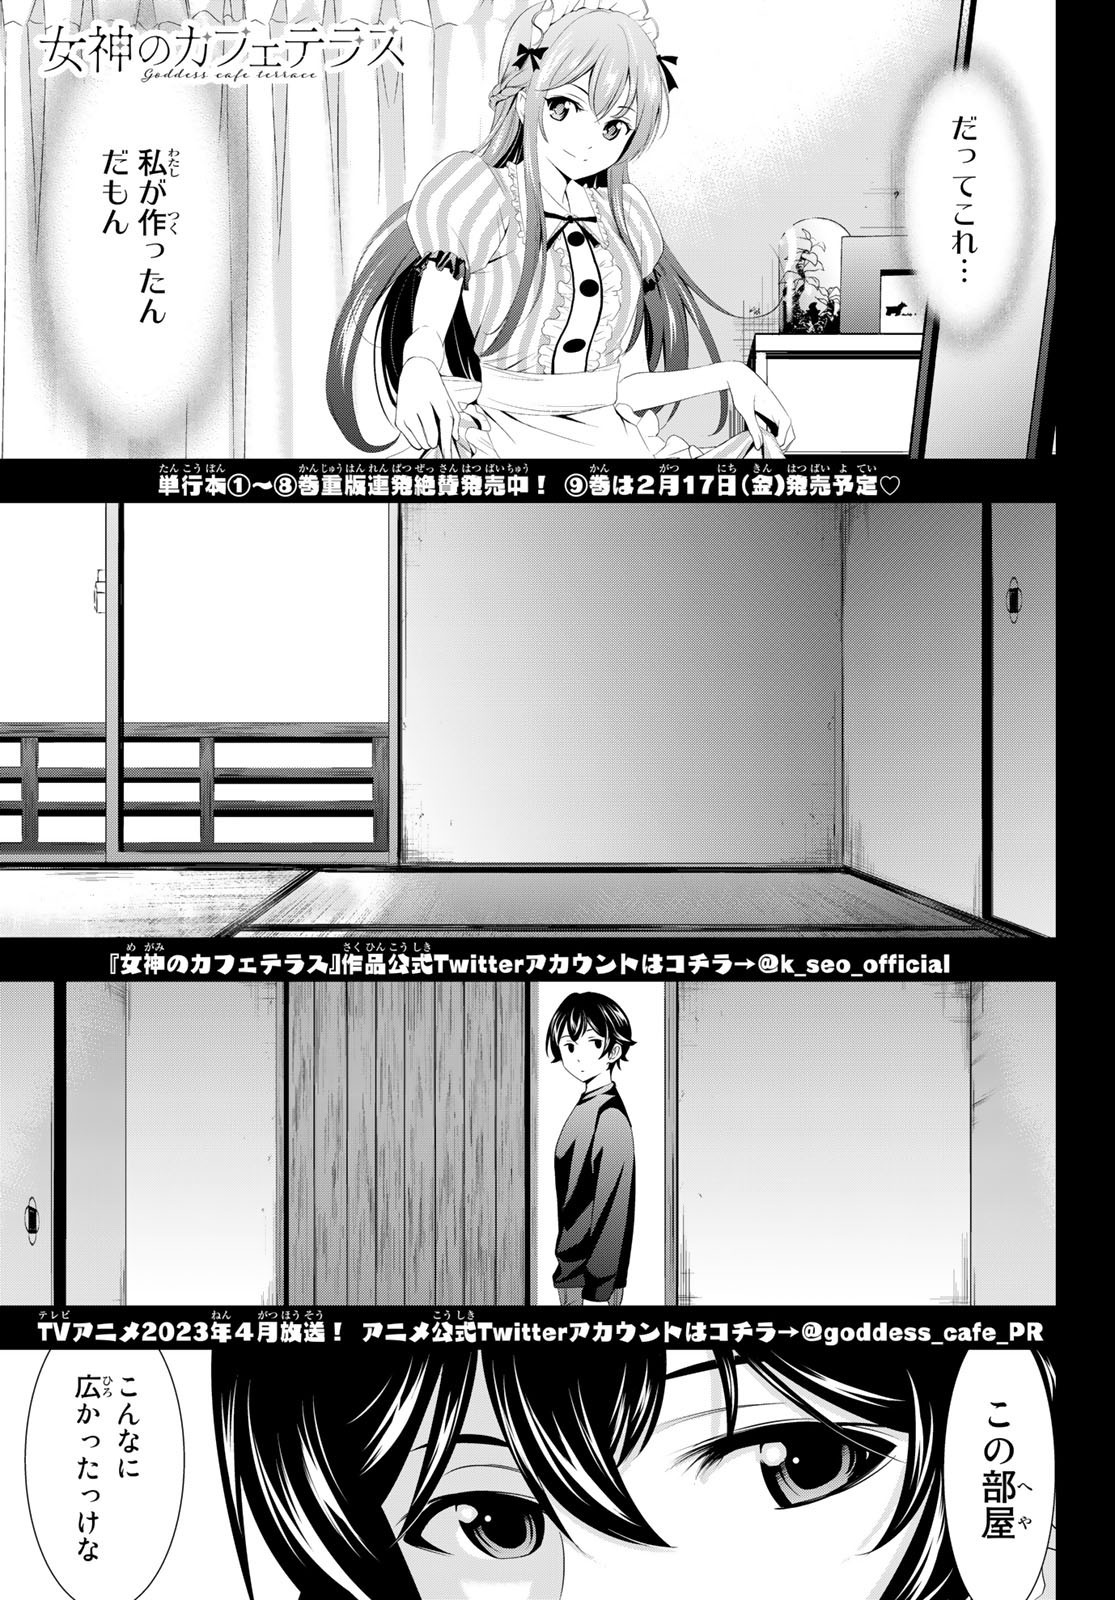 Goddess-Cafe-Terrace - Chapter 090 - Page 1